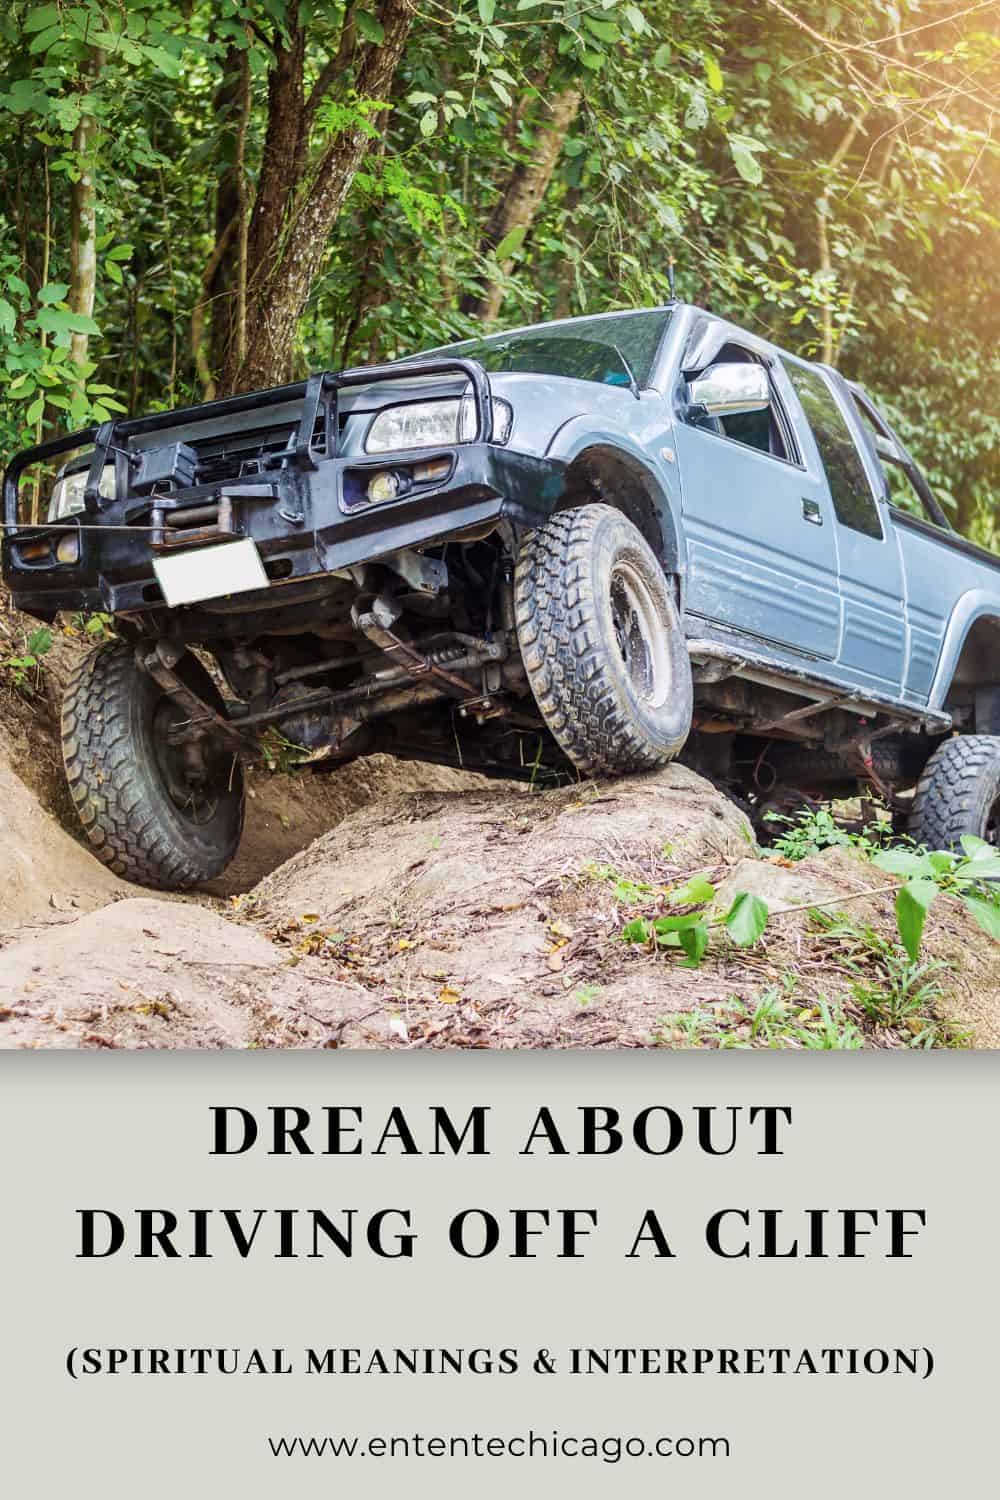 Ten meanings to dream of driving your car off a cliff